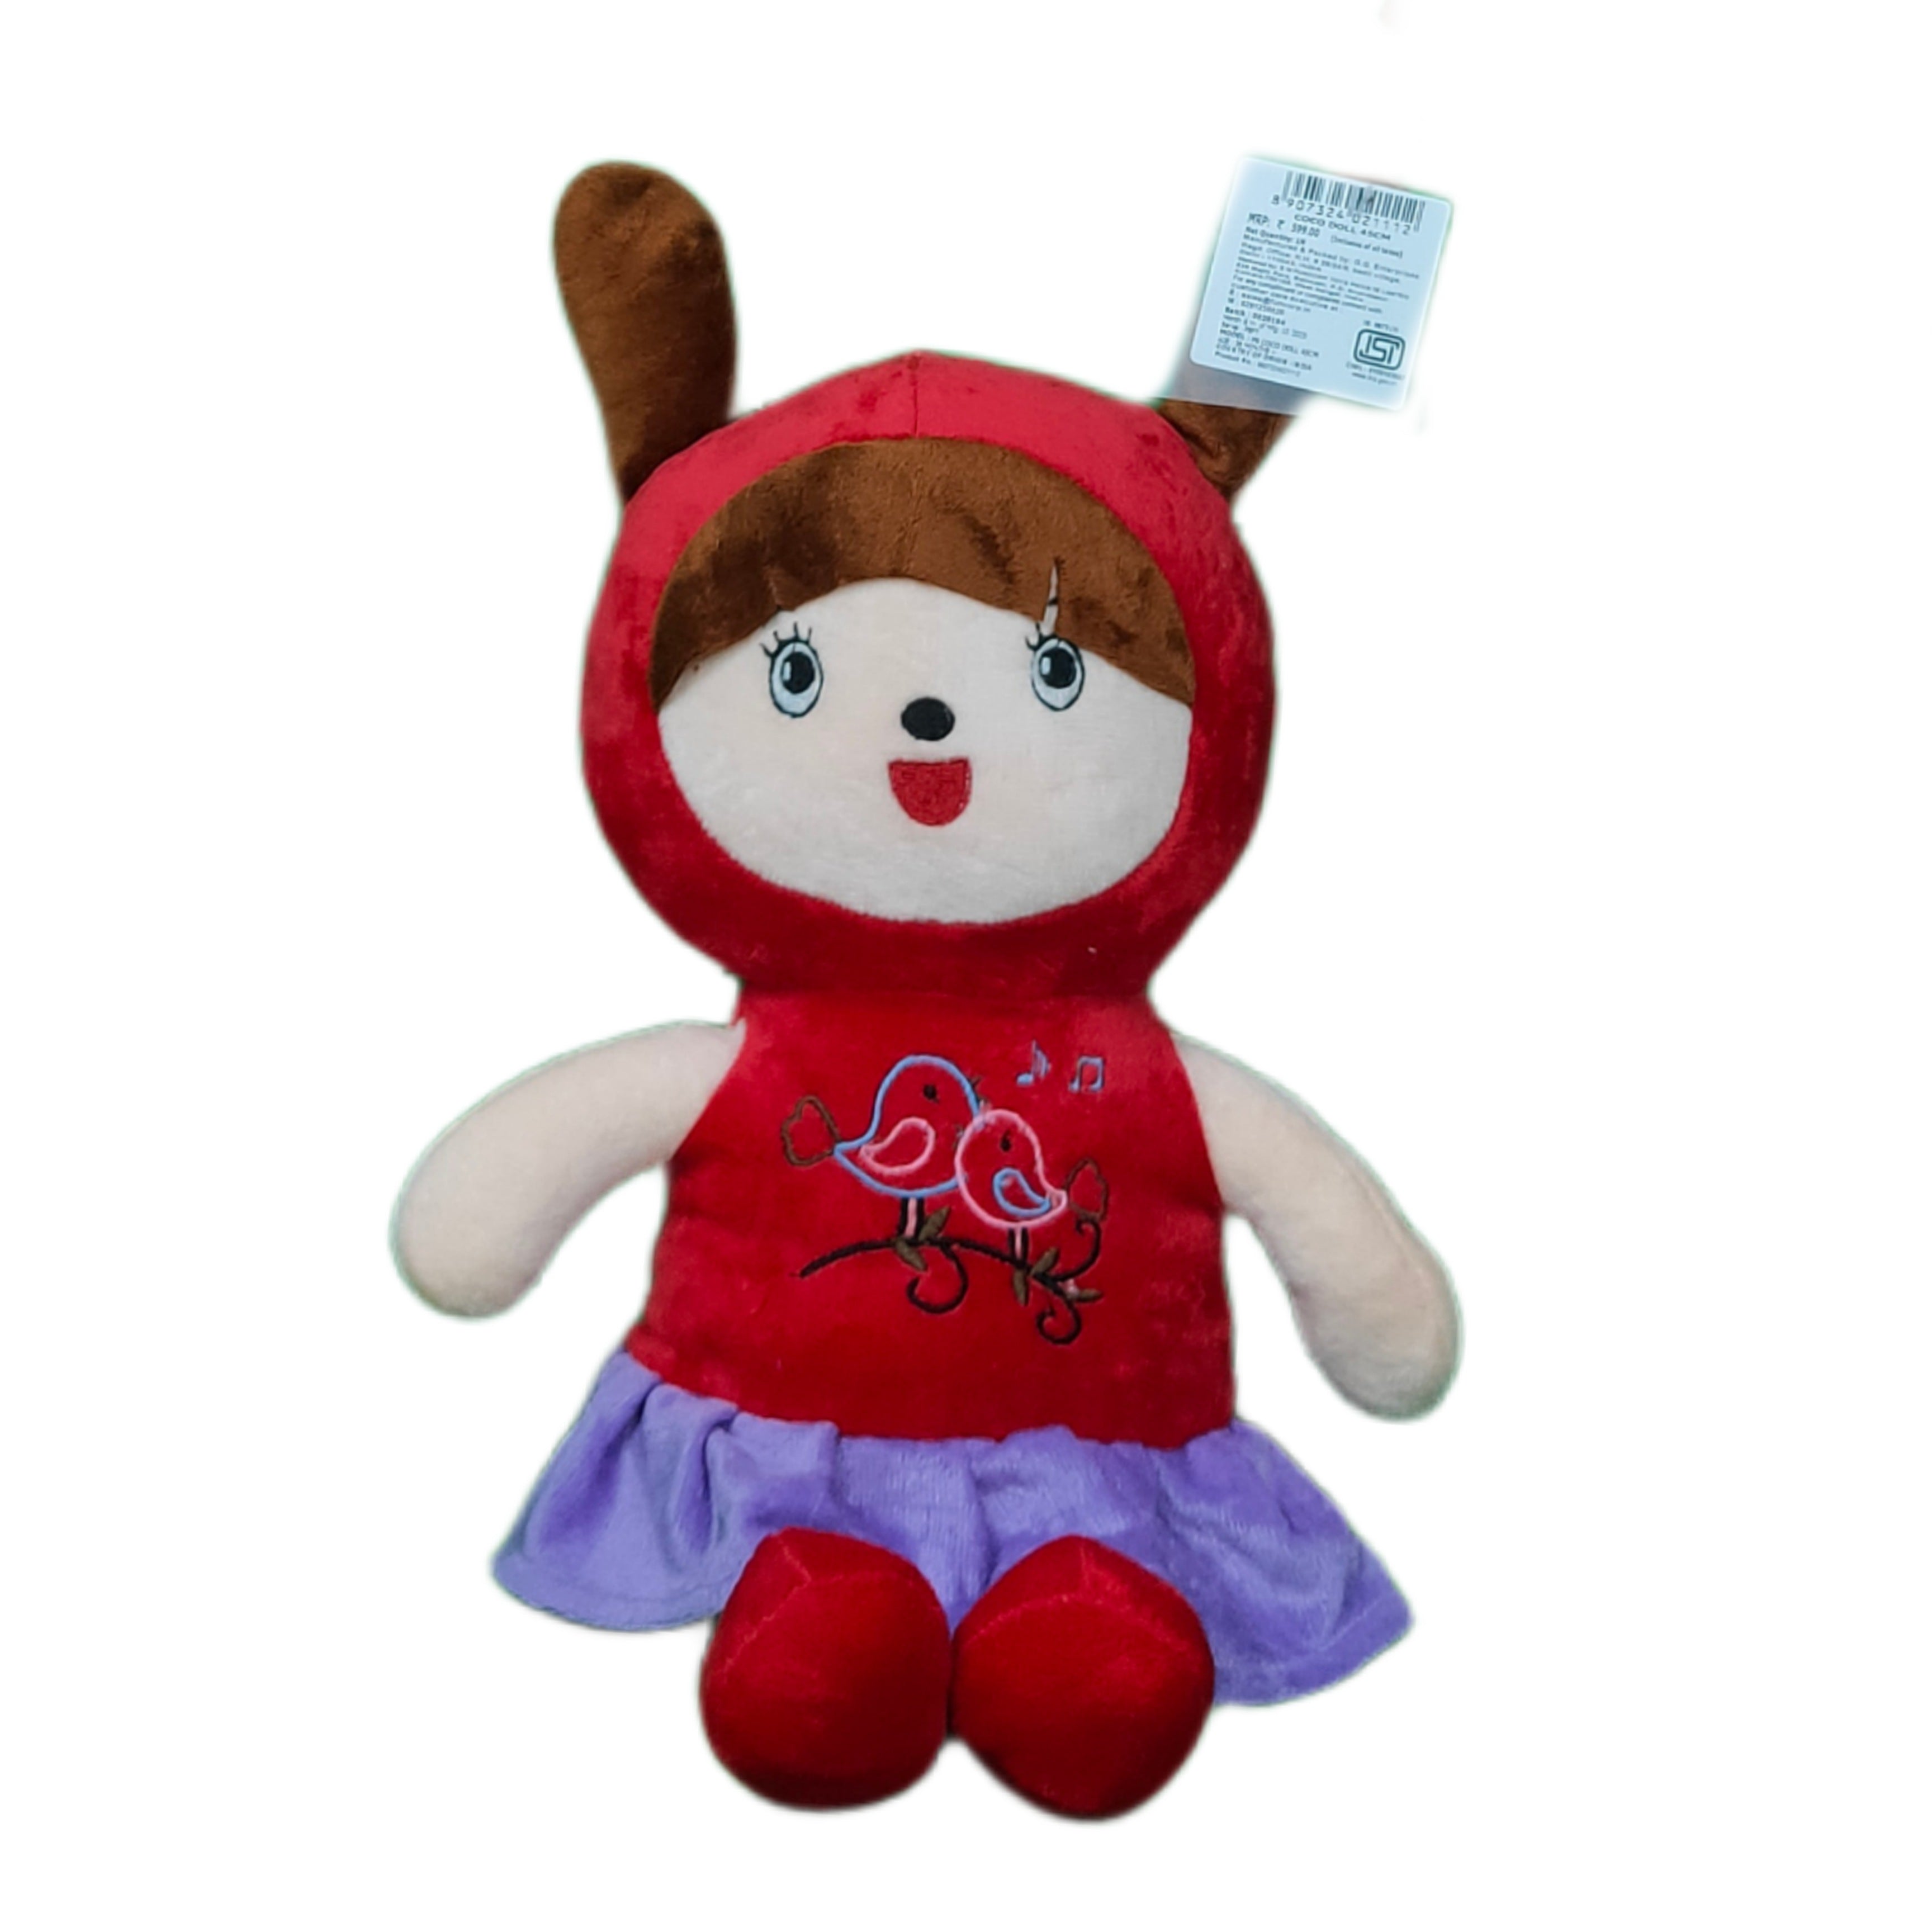 Play Hour Coco Rag Doll Plush Soft Toy Wearing Red Frock for Ages 3 Years and Up, 45cm